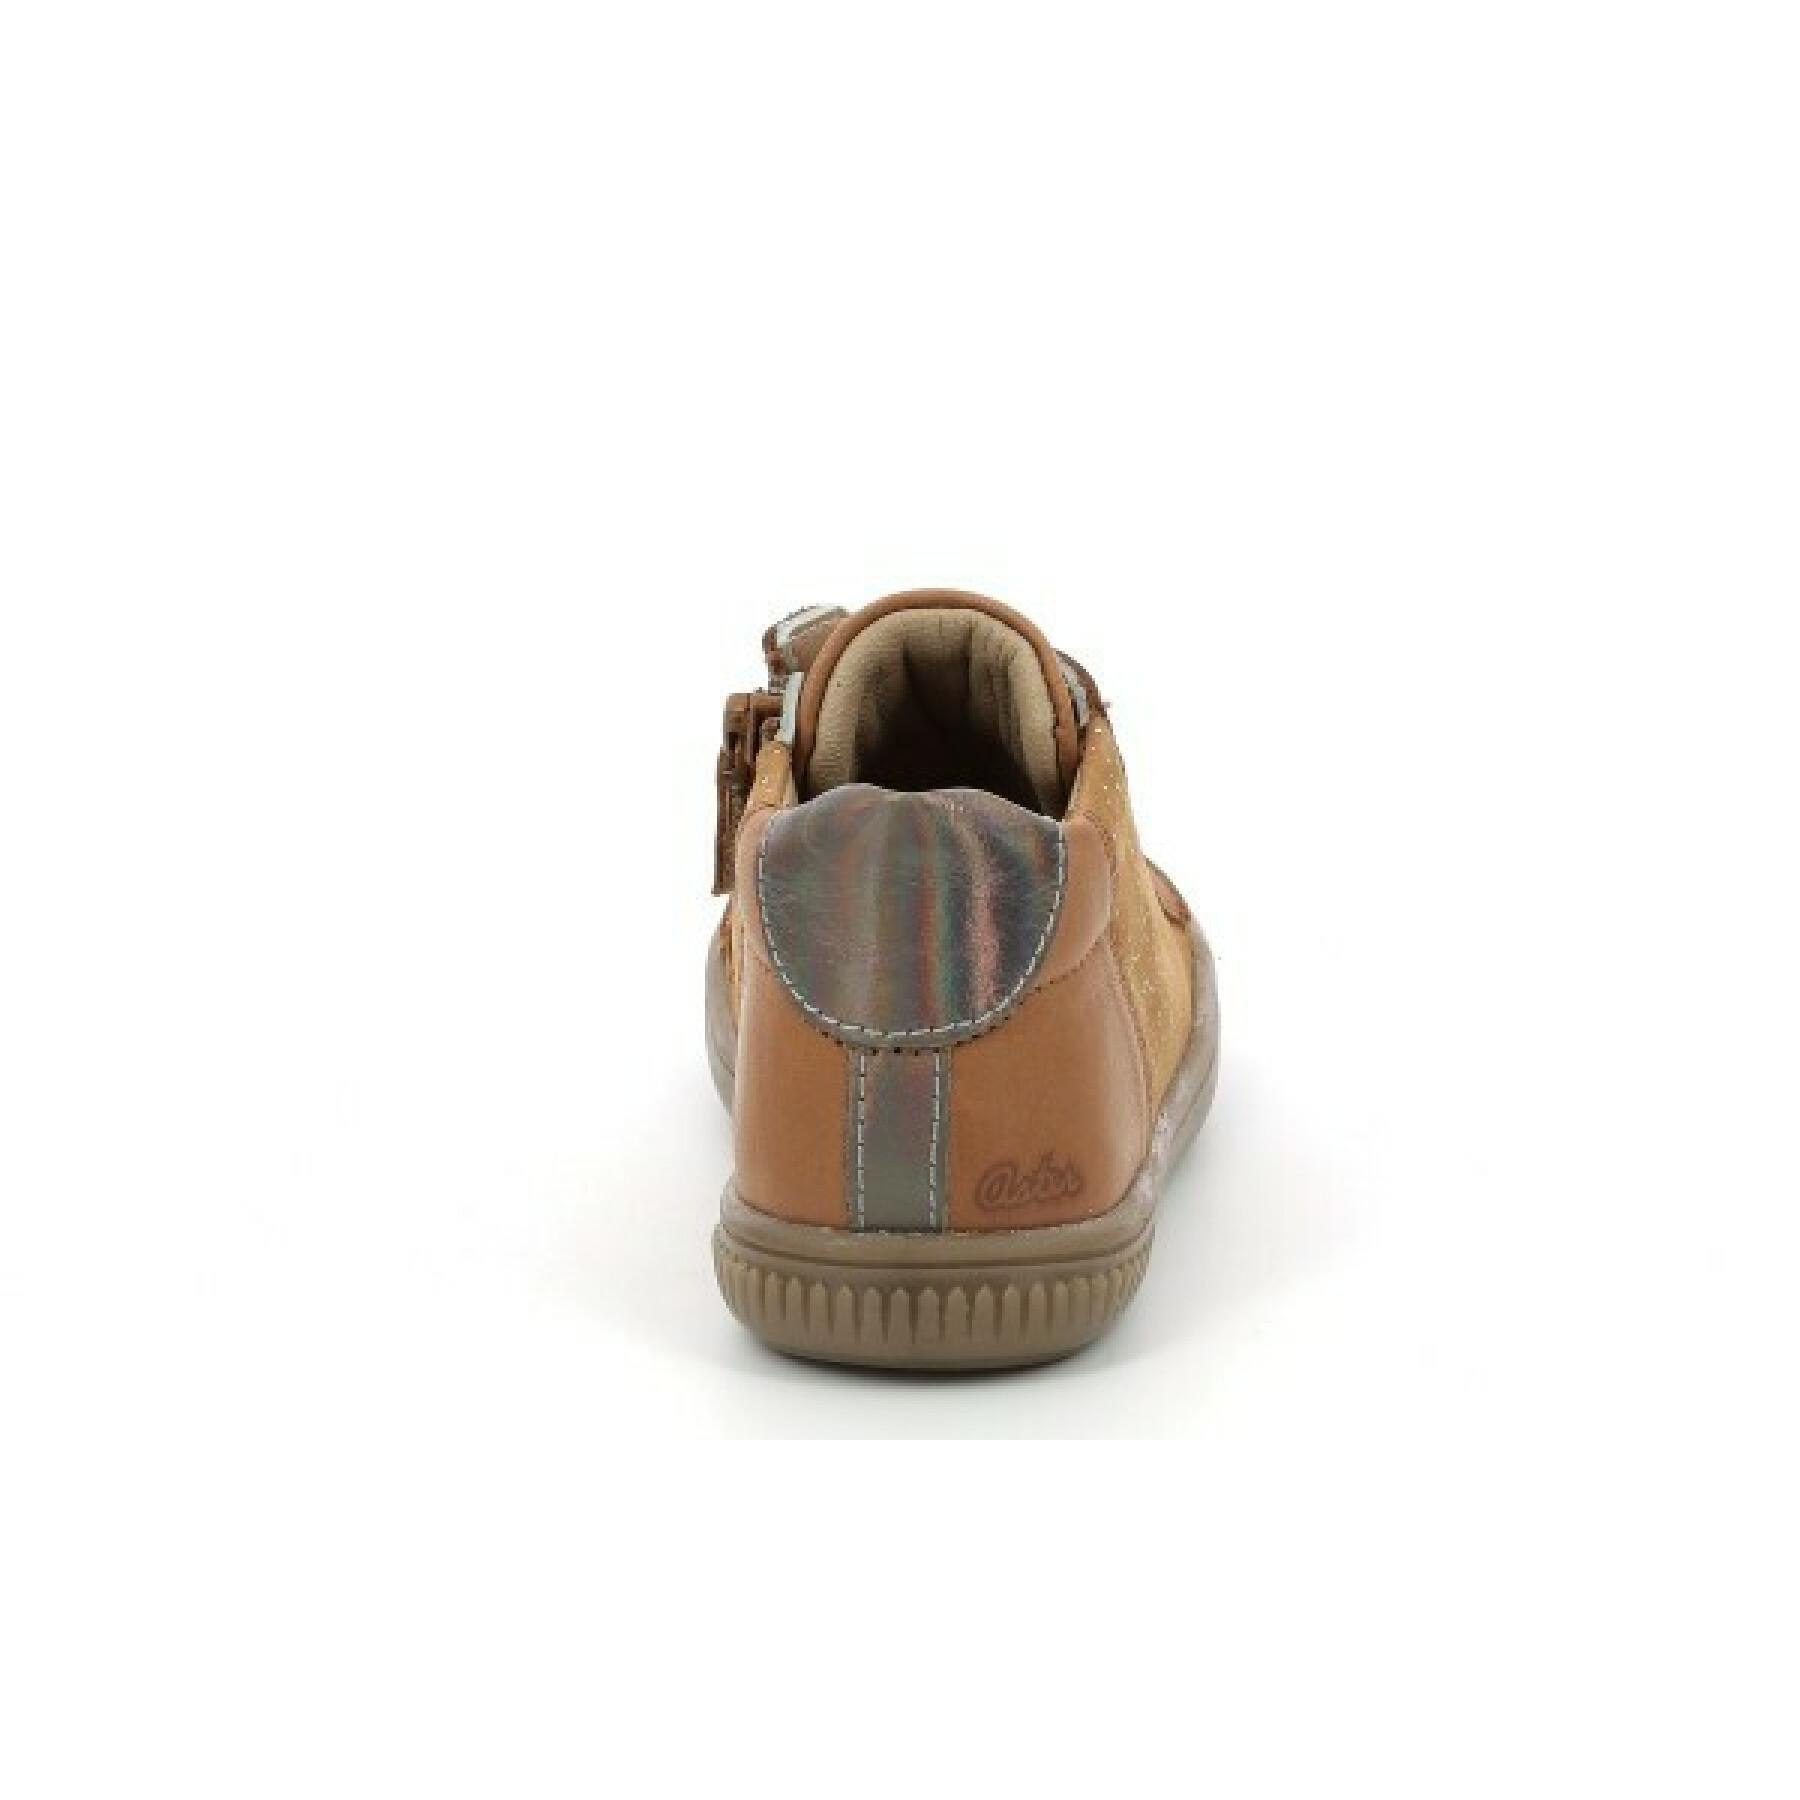 Children's sneakers Aster fratero